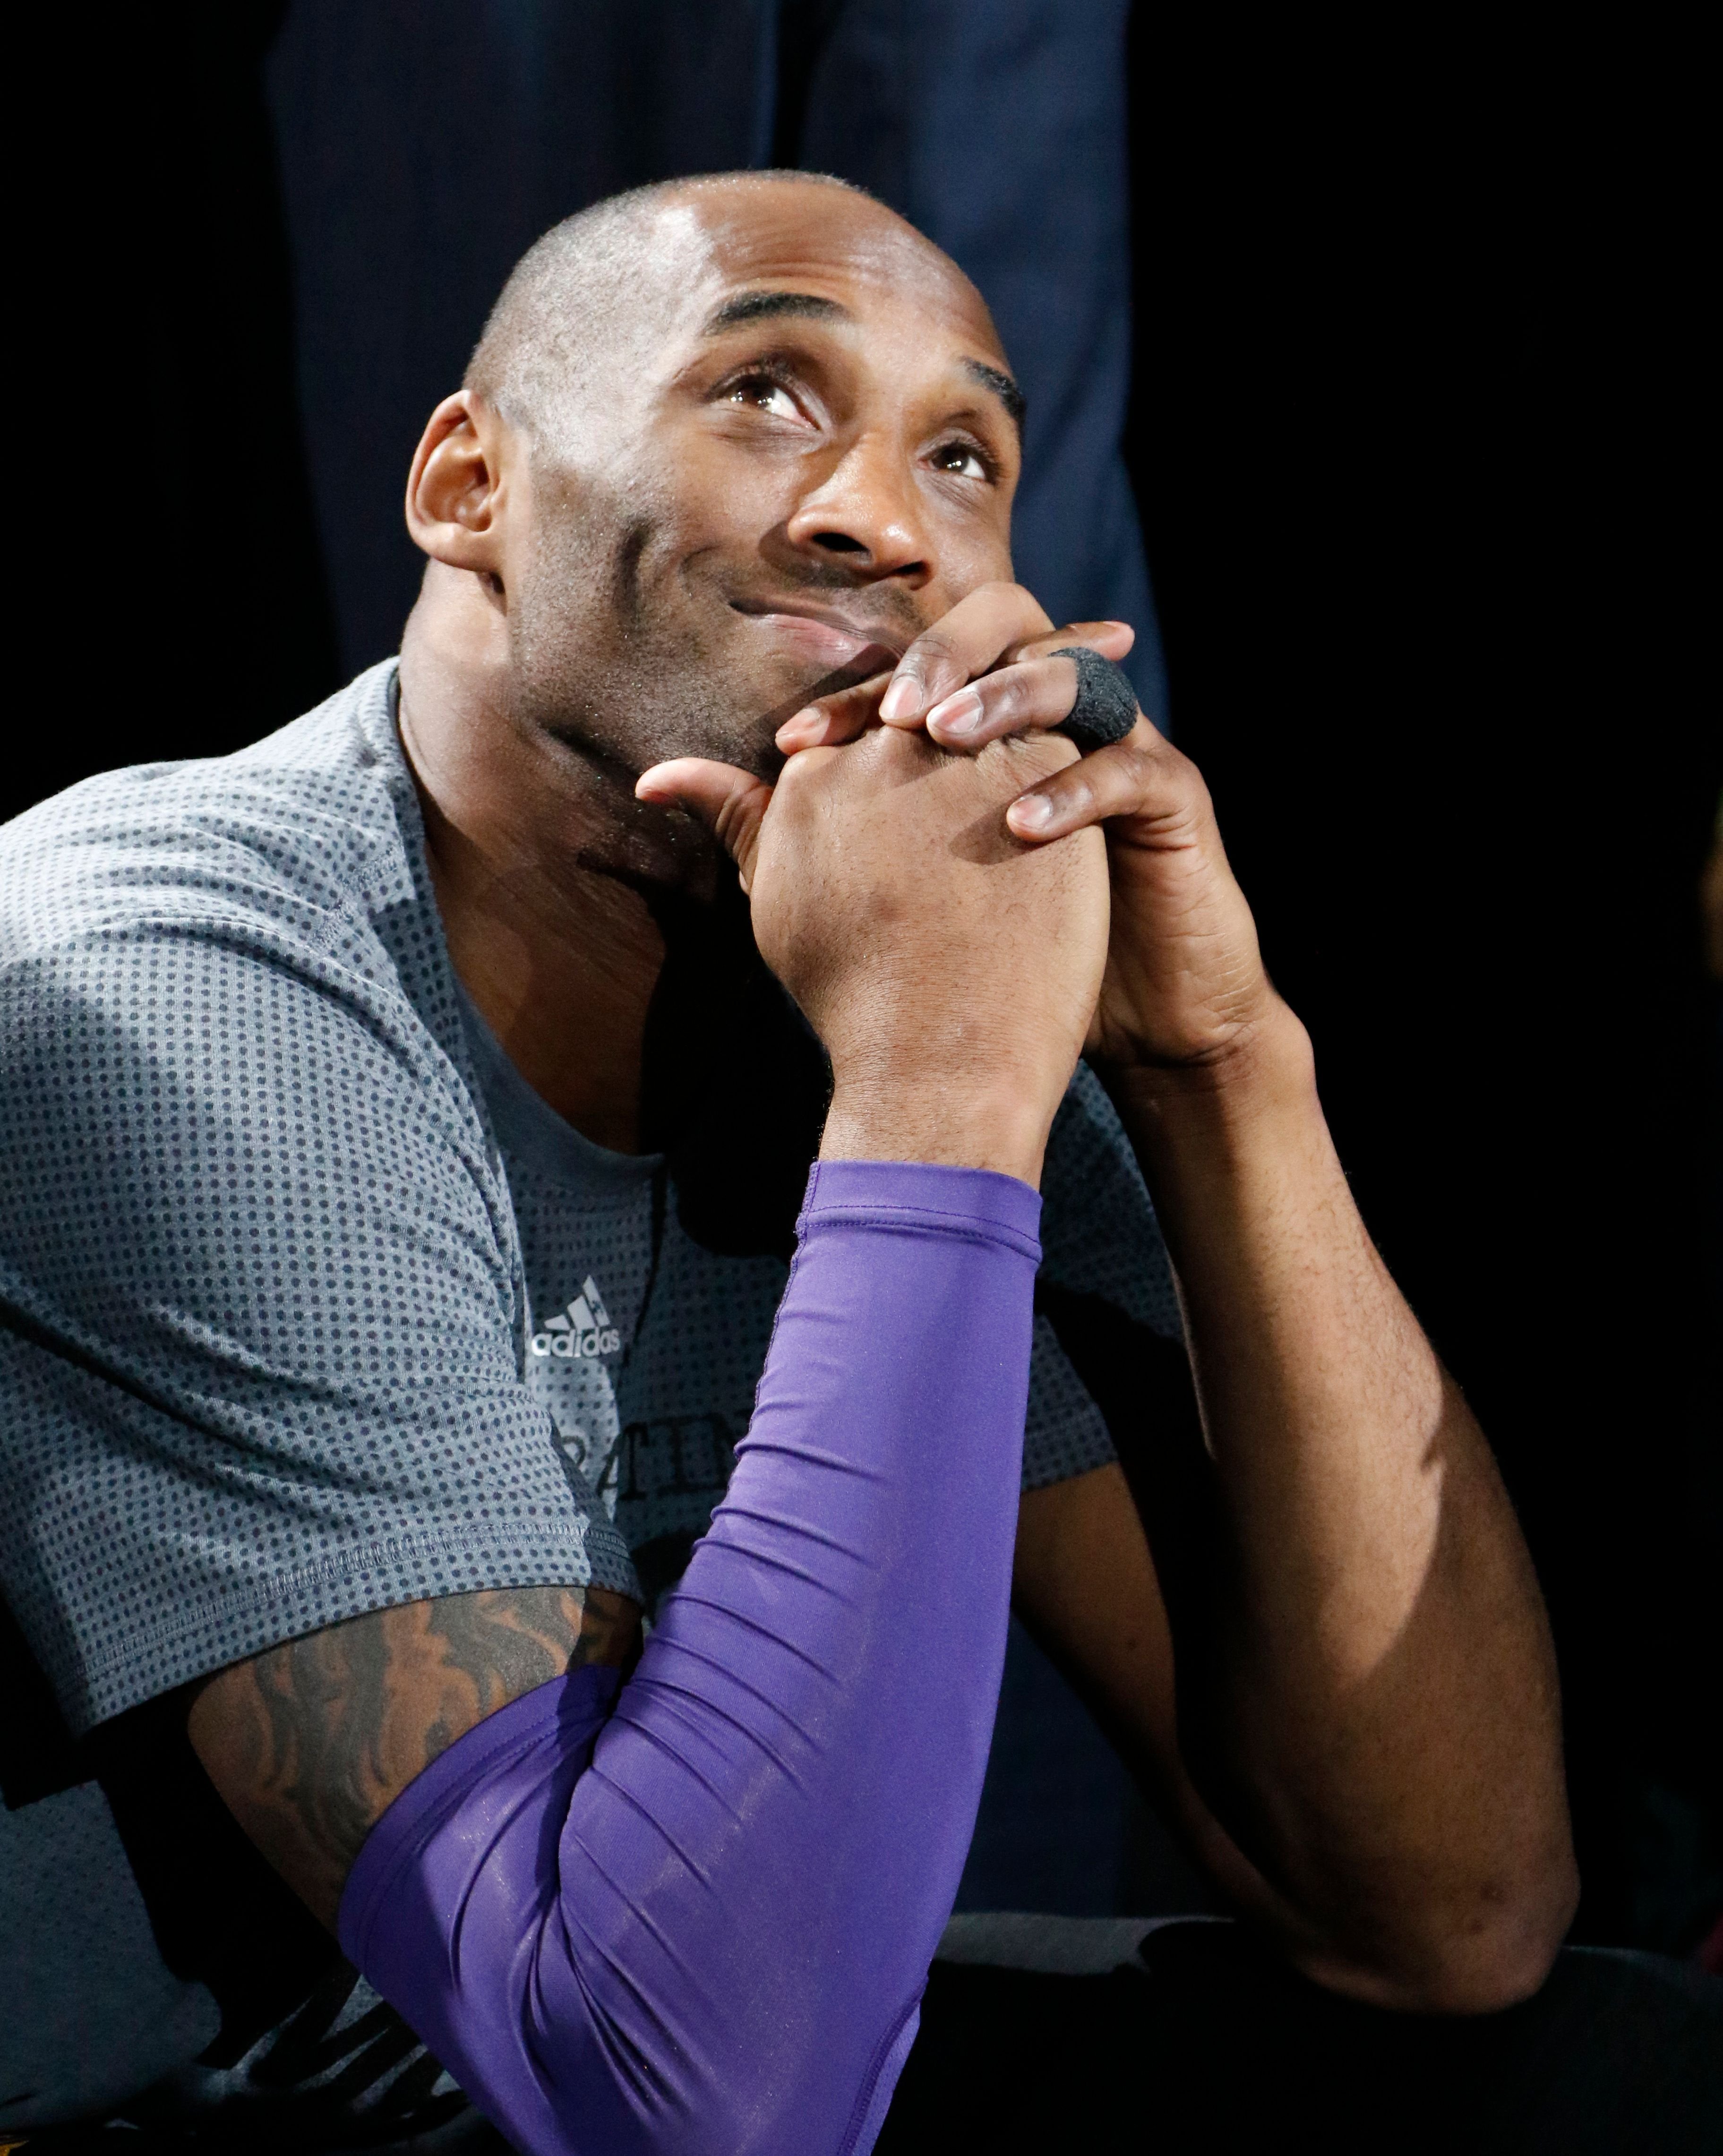 Kobe Bryant of the Los Angeles Lakers at AT&T Center in February 2016 in San Antonio, Texas. | Photo: Getty Images